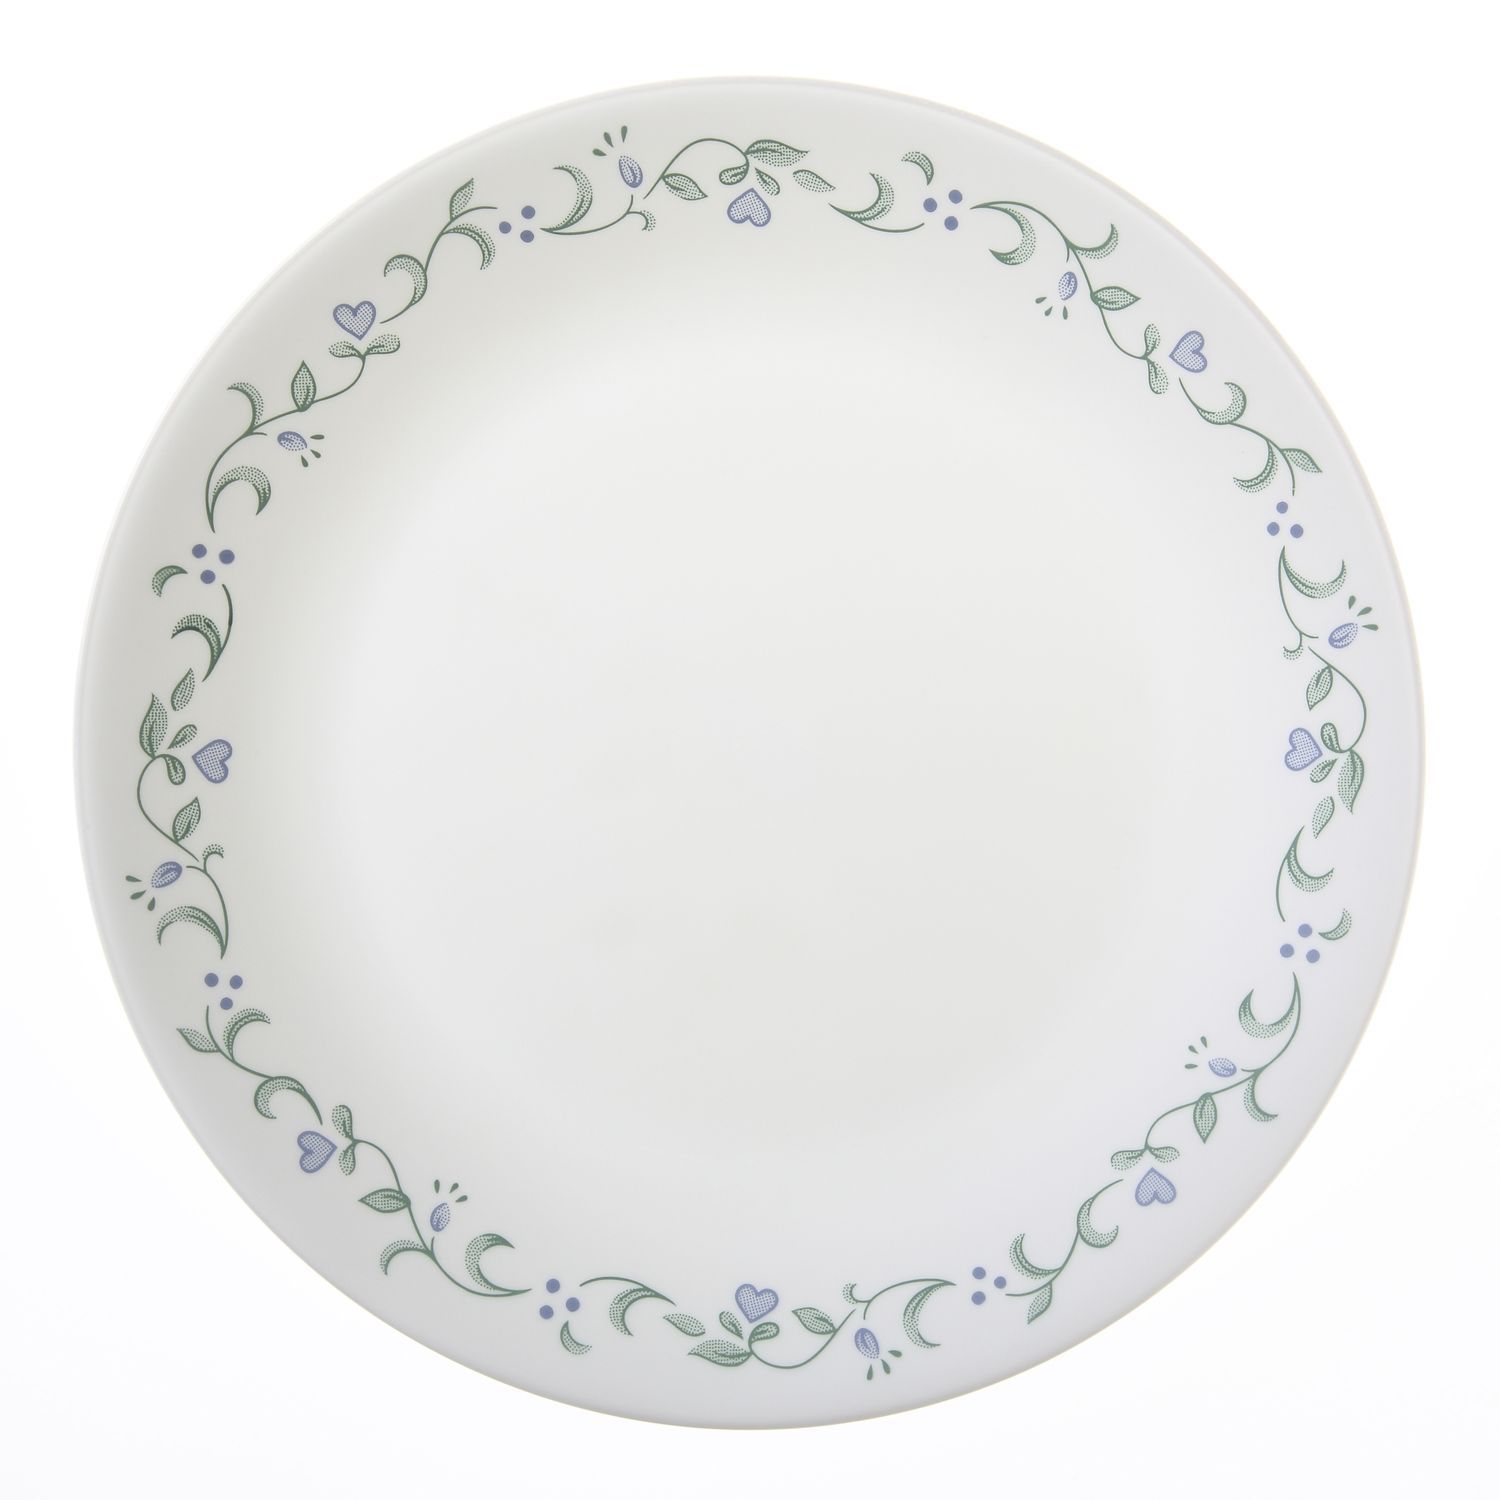   26  Corelle Country Cottage